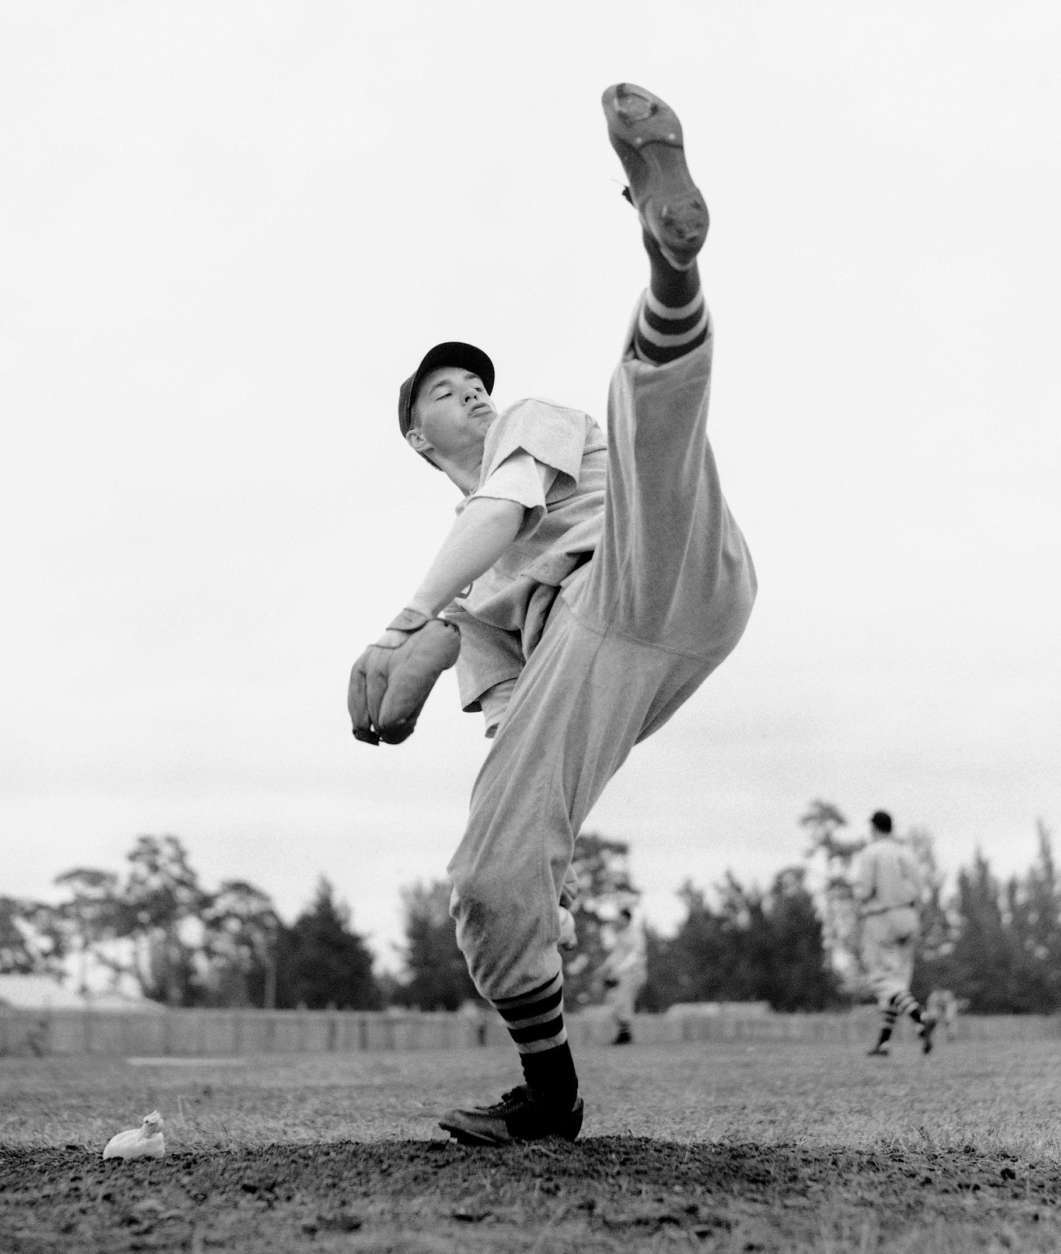 FILE- In this Feb. 28, 1941, file photo, Cleveland Indians star pitcher Bob Feller works on his form during spring training baseball in Fort Myers, Fla. Feller, the Iowa farm boy whose powerful right arm earned him the nickname "Rapid Robert" and made him one of baseball's greatest pitchers during a Hall of Fame career with the Indians, has died Wednesday, Dec. 15, 2010. He was 92.  (AP Photo/File)